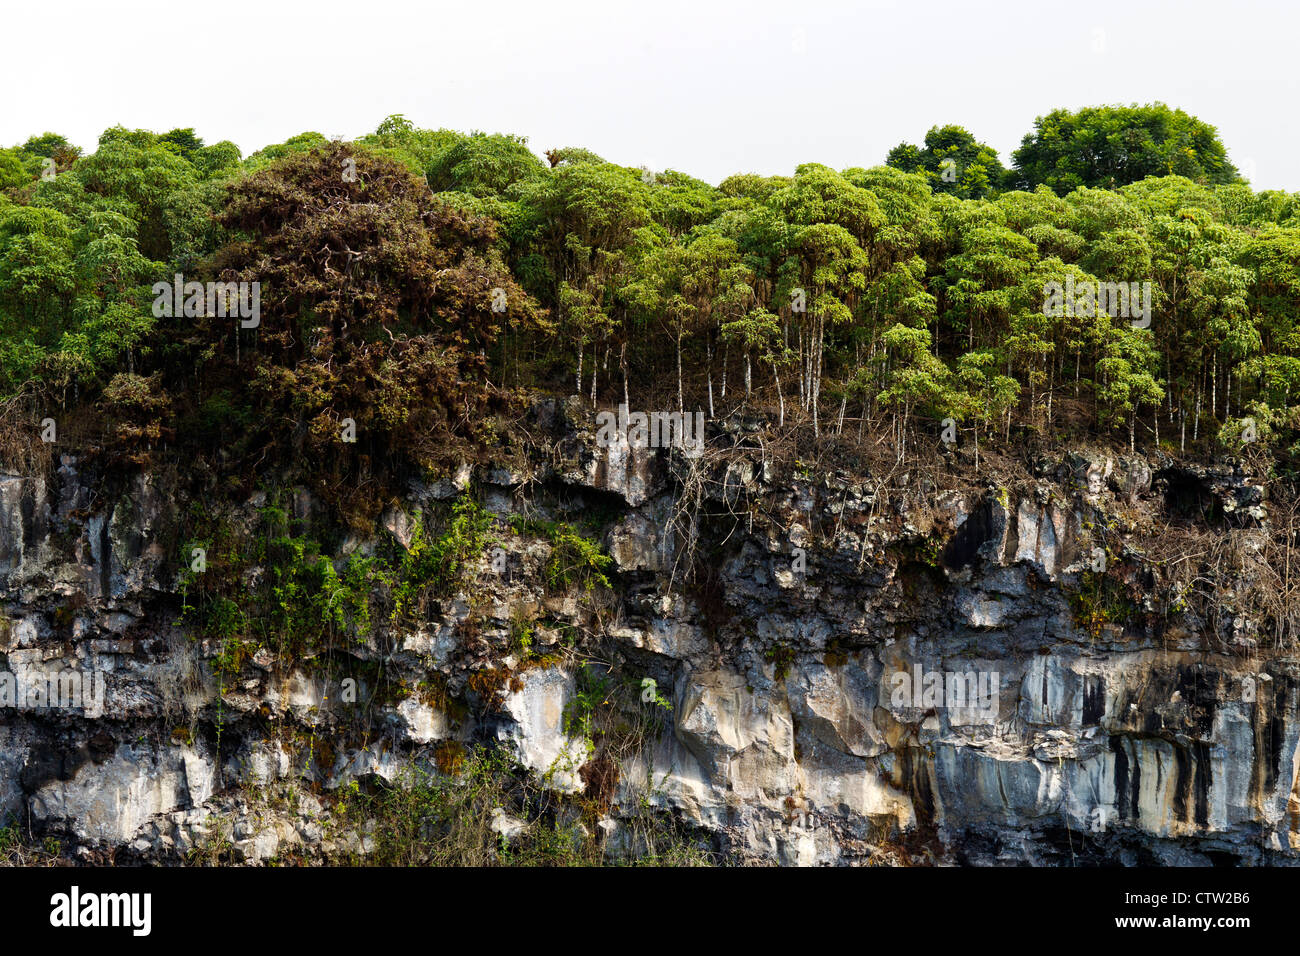 View of Los Gemelos / 'The Twins', one a pair of volcanic depressions, with Scalesia trees, Galapagos Islands National Park, Santa Cruz Island, Galapagos, Ecuador Stock Photo